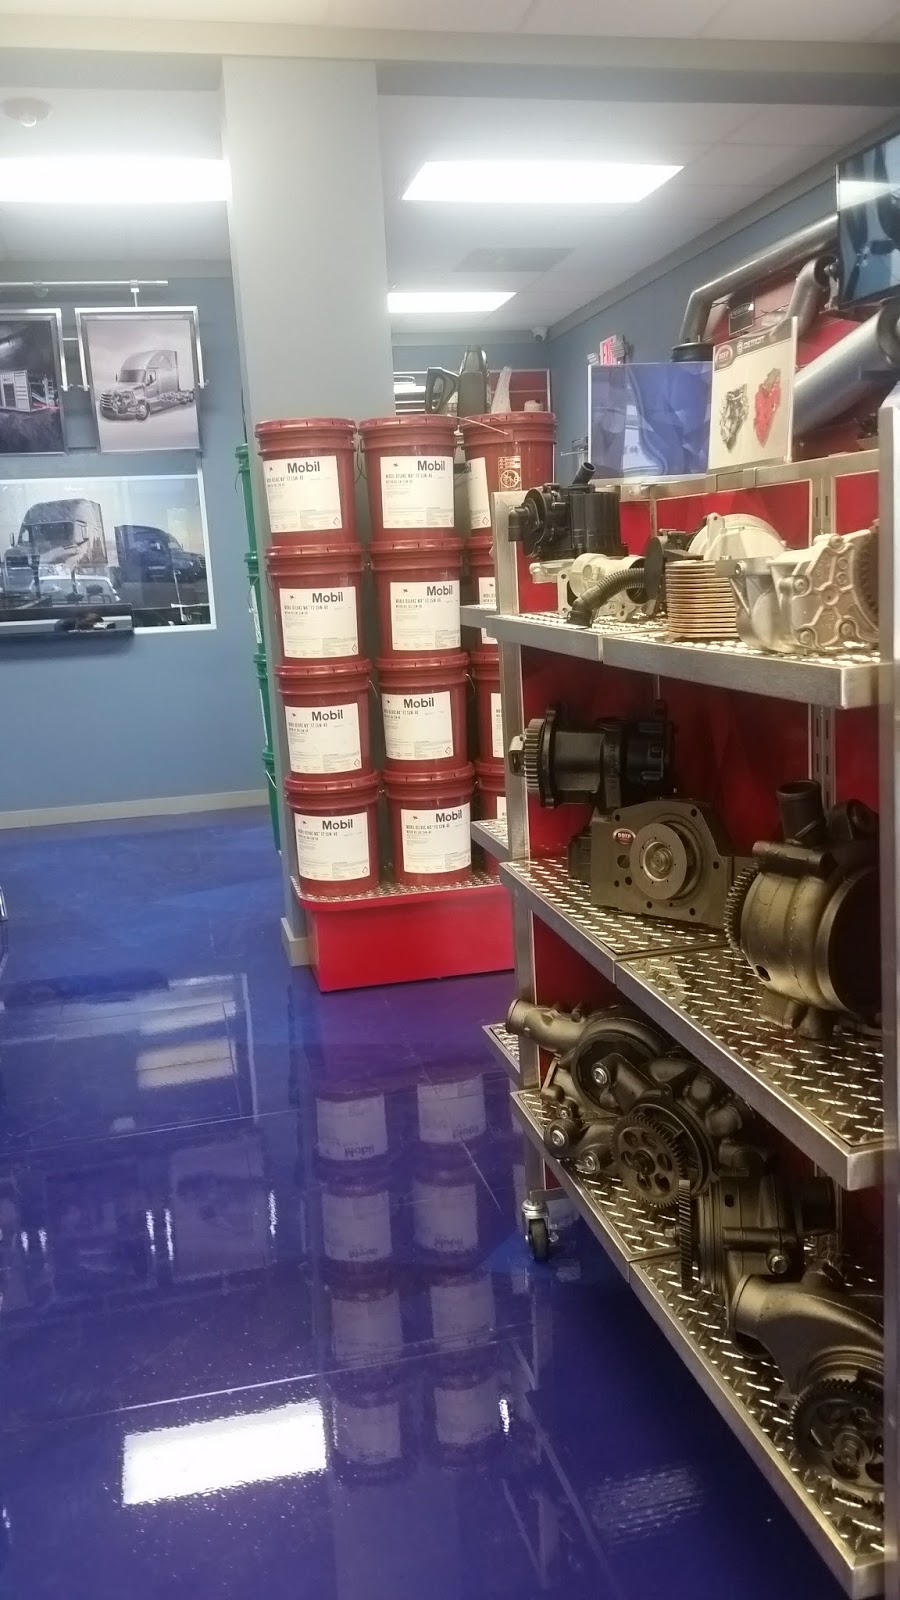 Discount Diesel Truck Parts | 9907 NW 116th Way, Medley, FL 33178 | Phone: (305) 887-3323